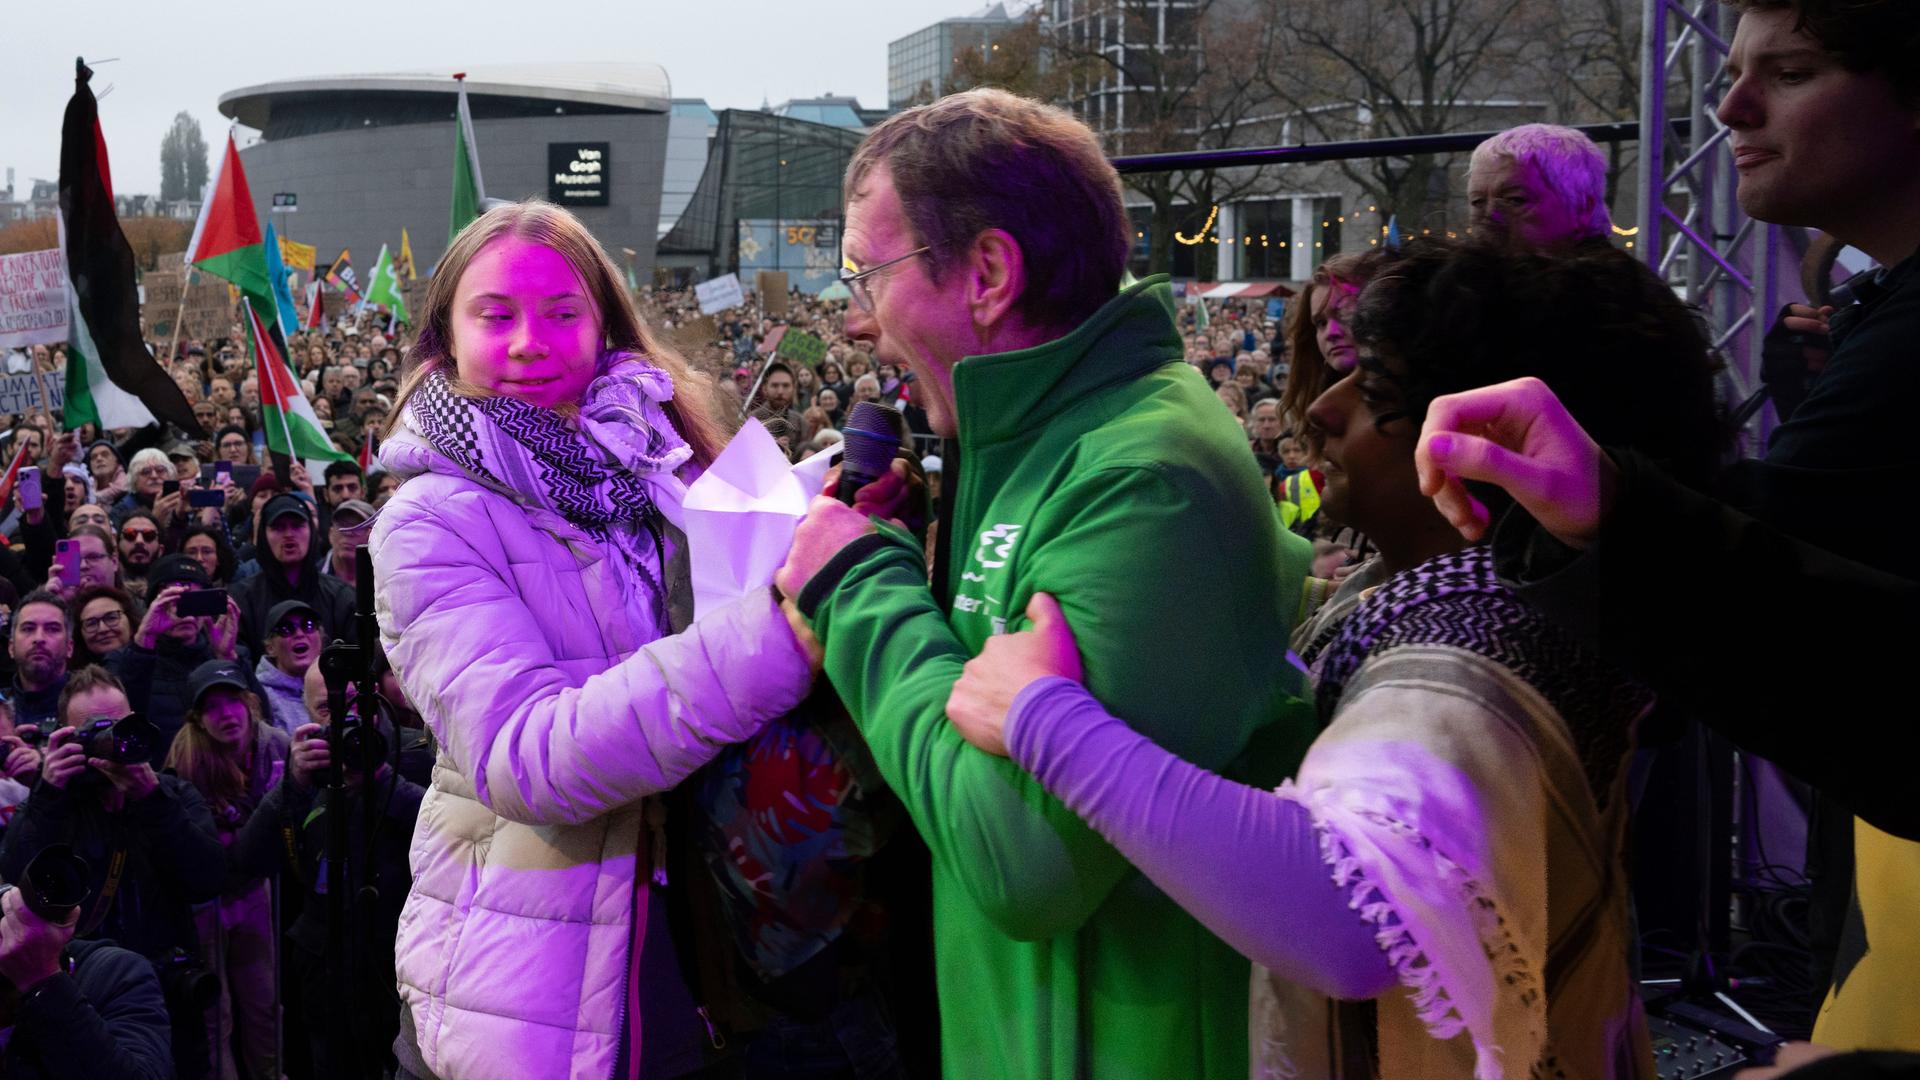 The picture shows climate activist Greta Thunber on a stage in Amsterdam, to her left a man from the audience in a green jacket who has taken the microphone away from her.